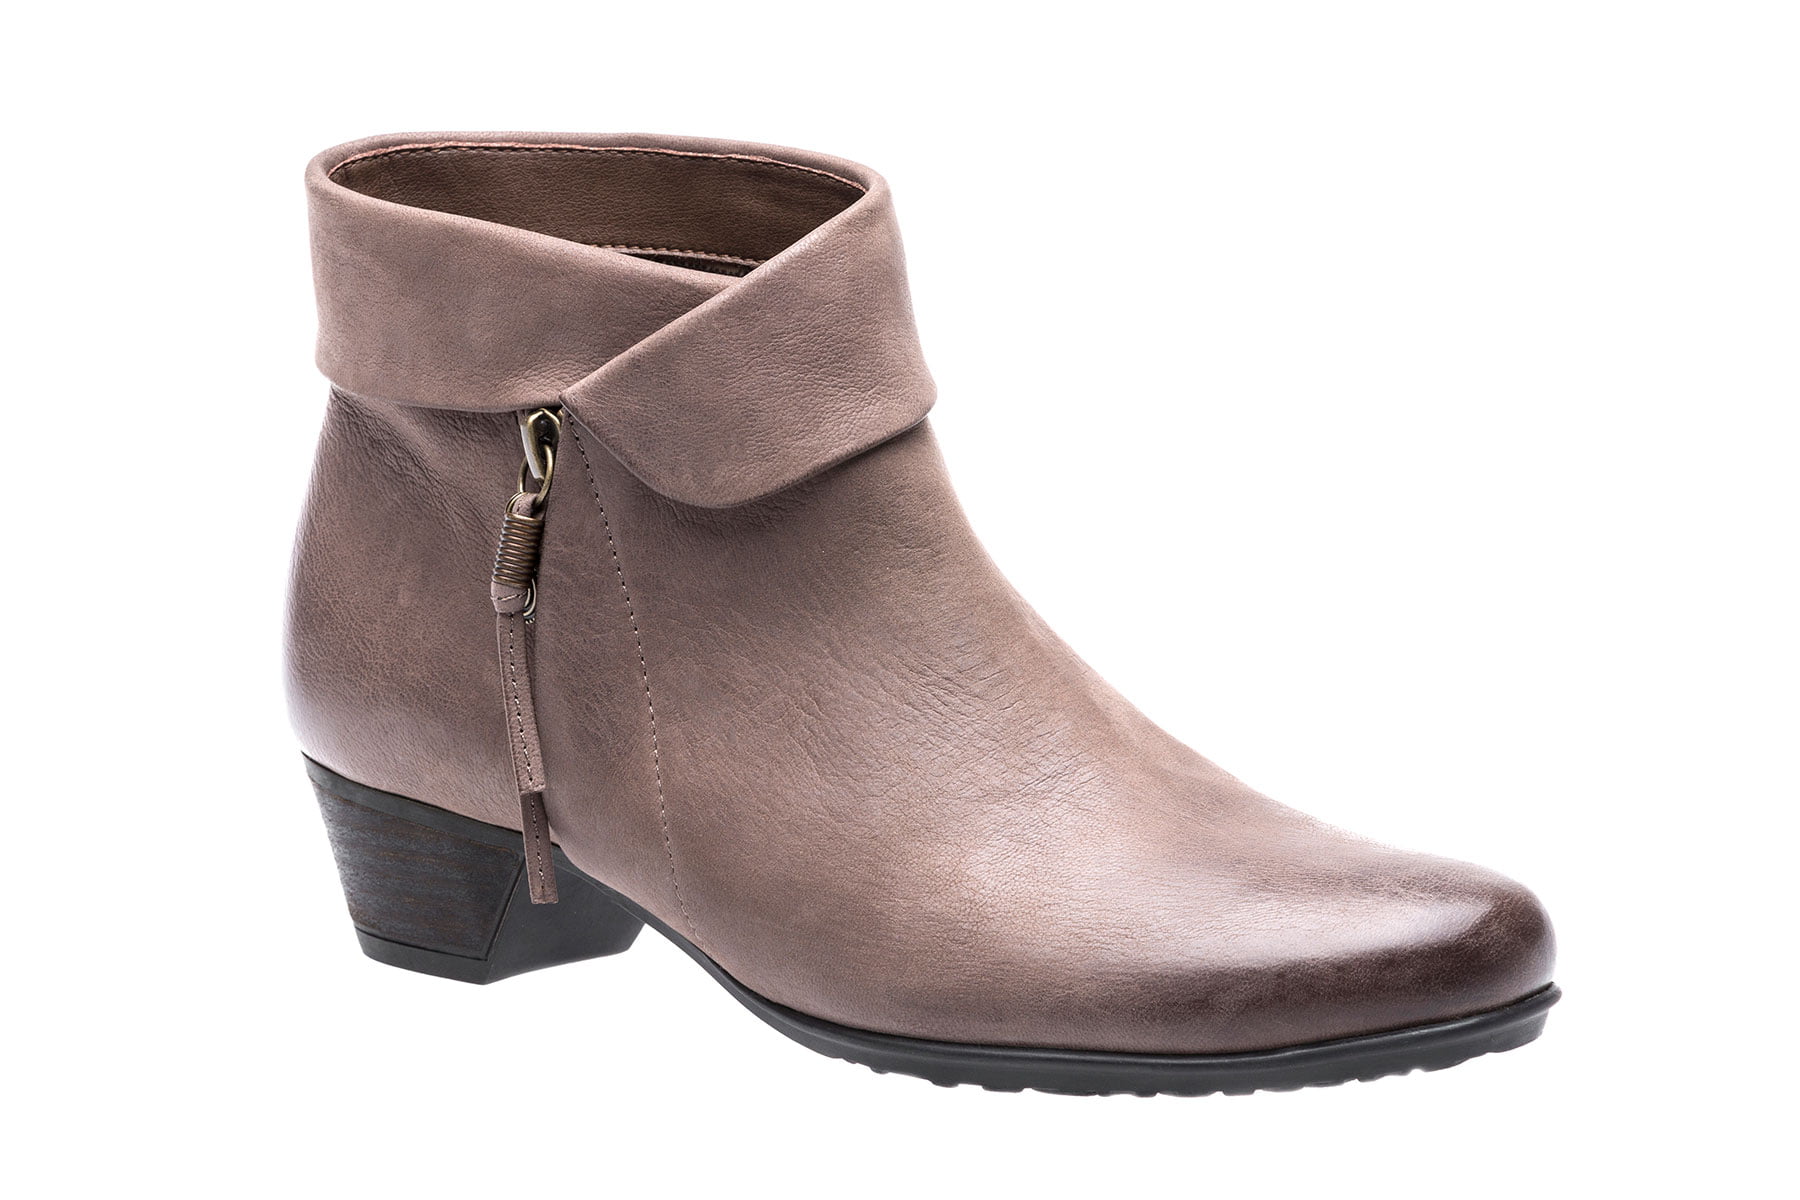 abeo boots on sale